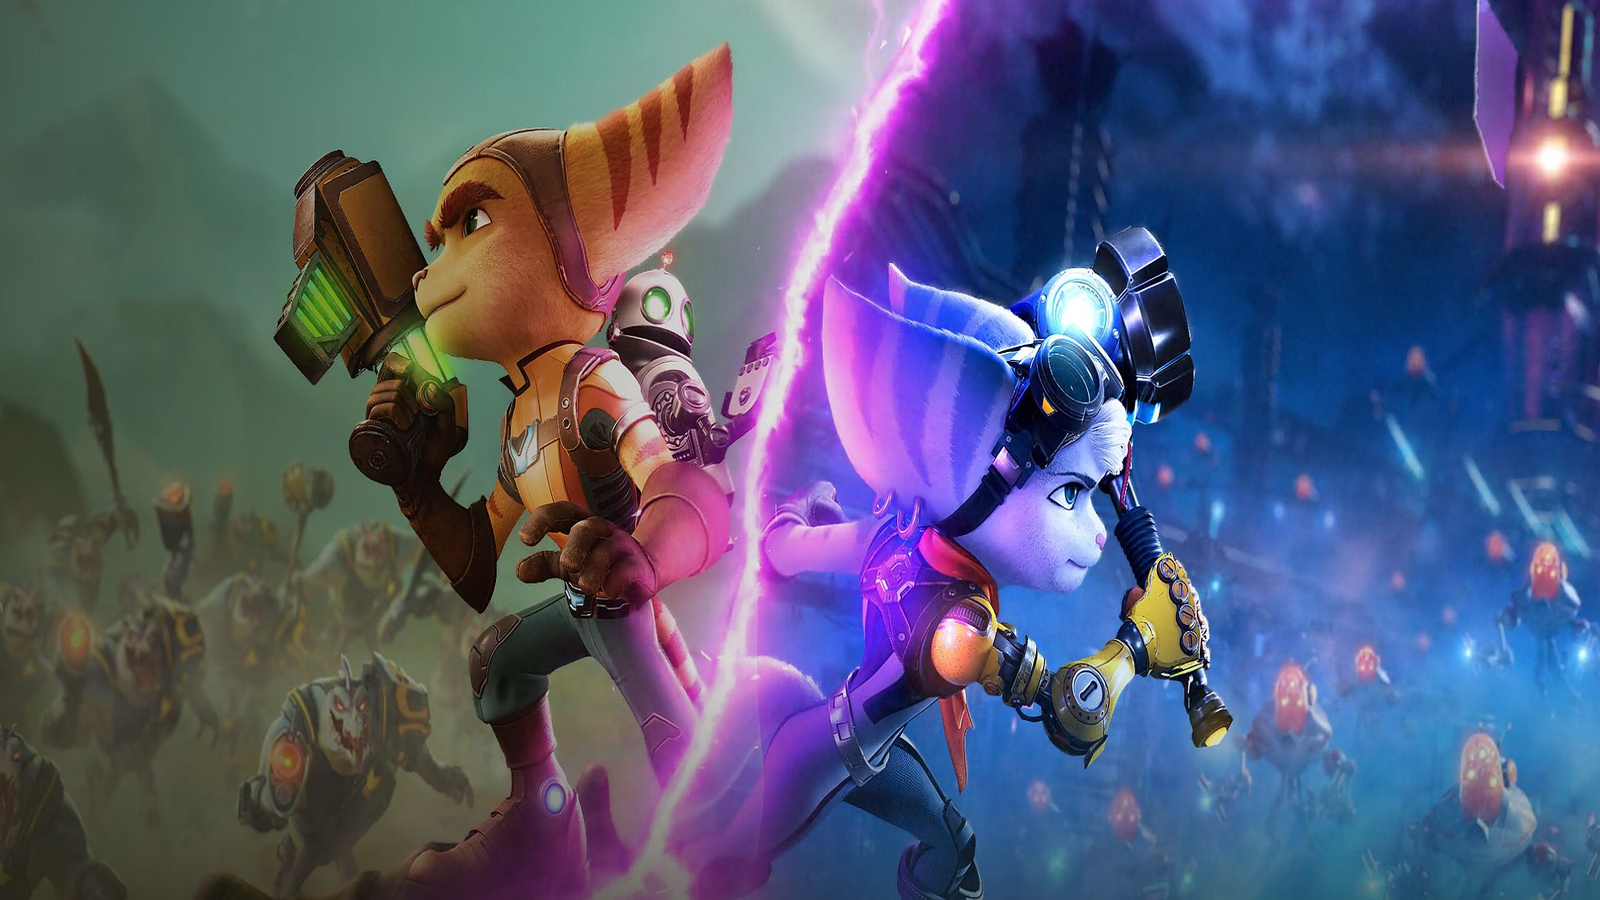 Ratchet And Clank Rift Apart Review Metacritic